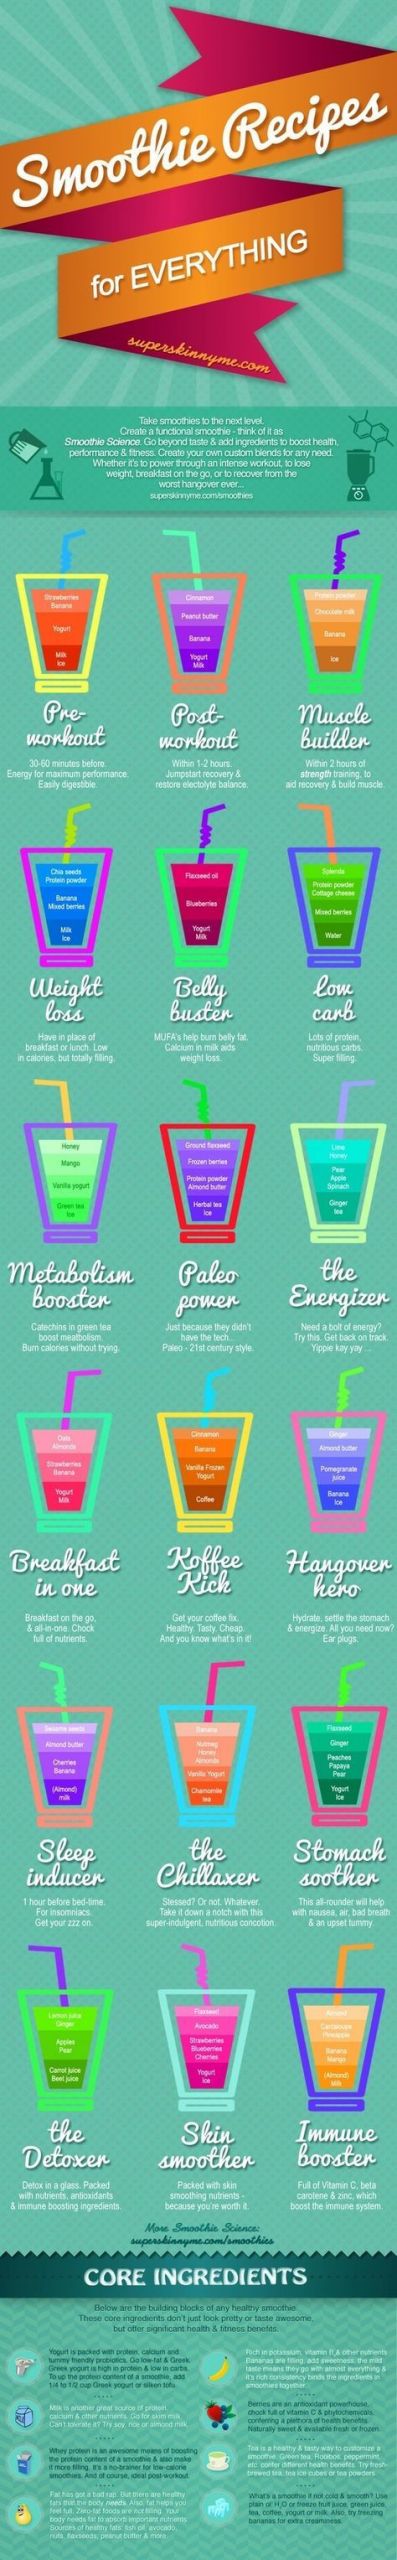 Pre Made Smoothies For Weight Loss
 Smoothie Recipes for Everything